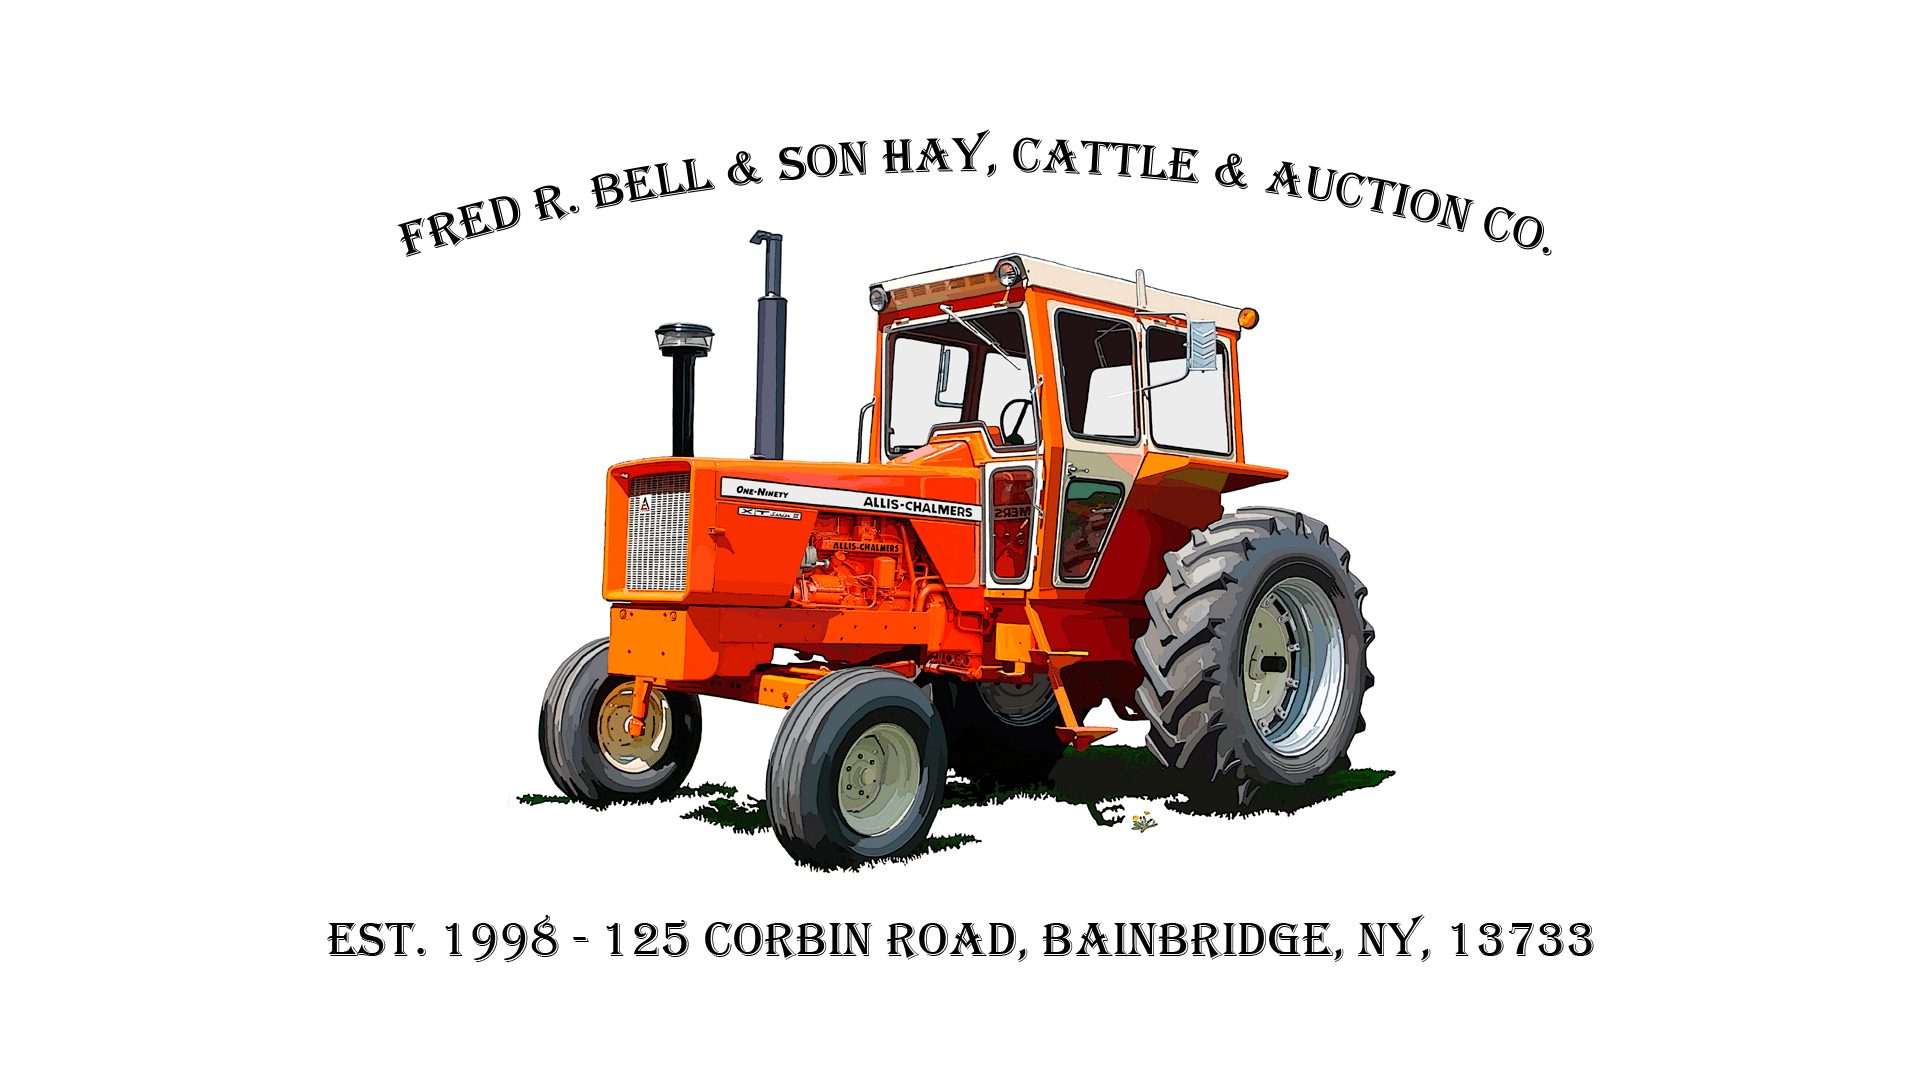 Fred R. Bell & Son Hay, Cattle & Auction